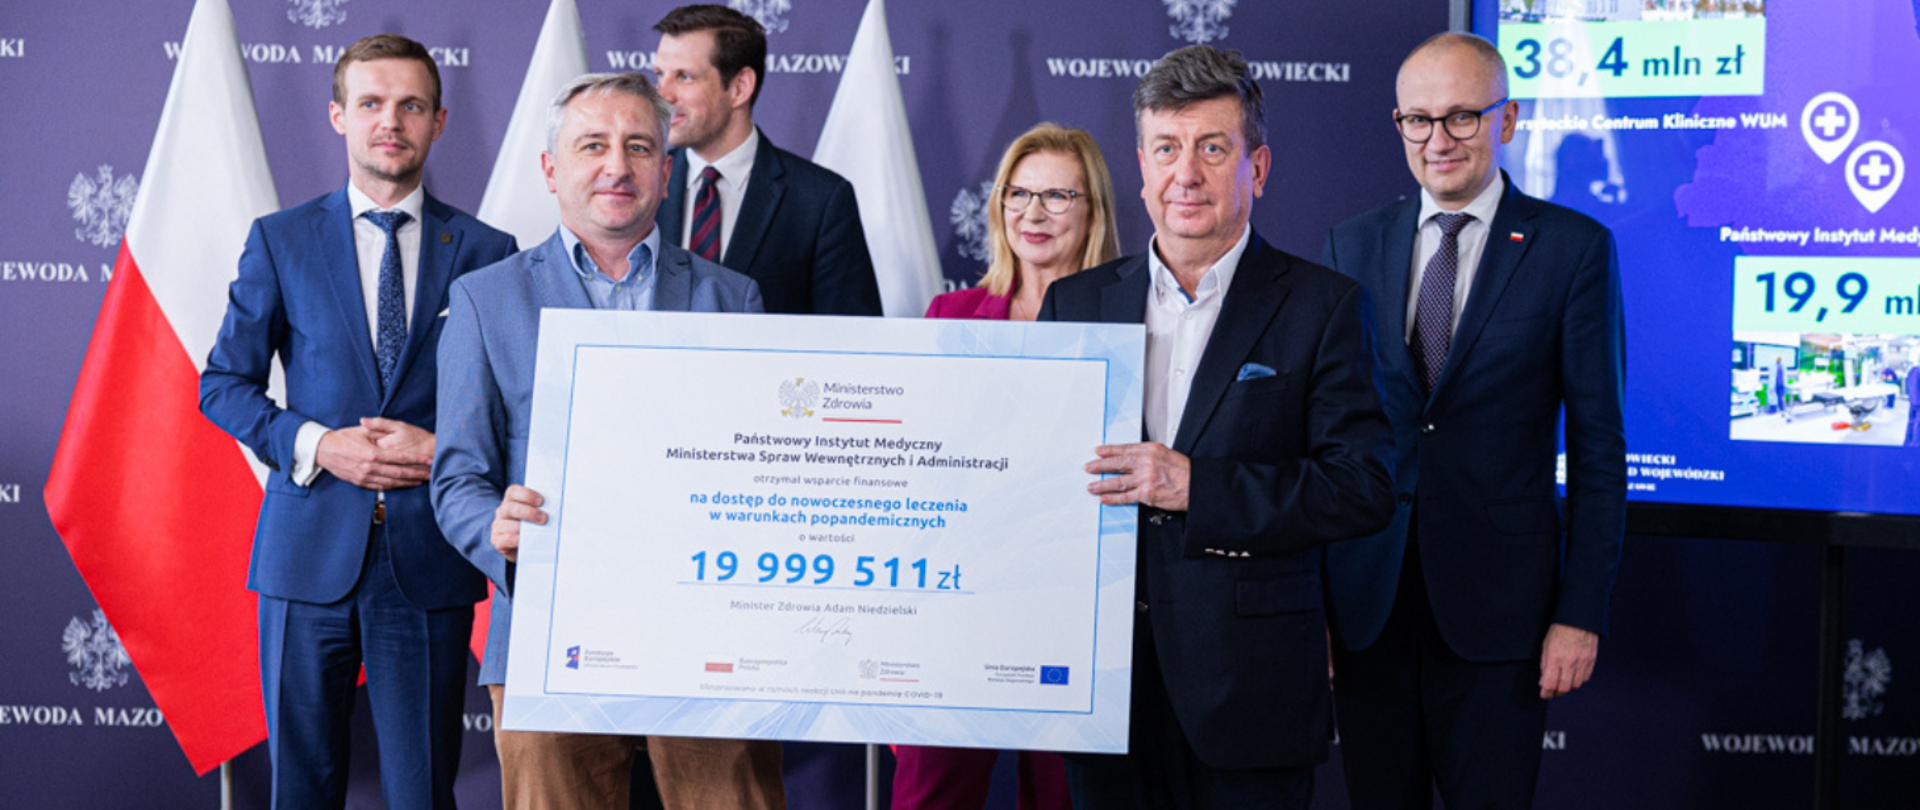 PIM MSWiA as a beneficiary of REACT-EU Competition - Nearly PLN 20 Million Grant for Access to Modern Treatment in Post-Pandemic Conditions